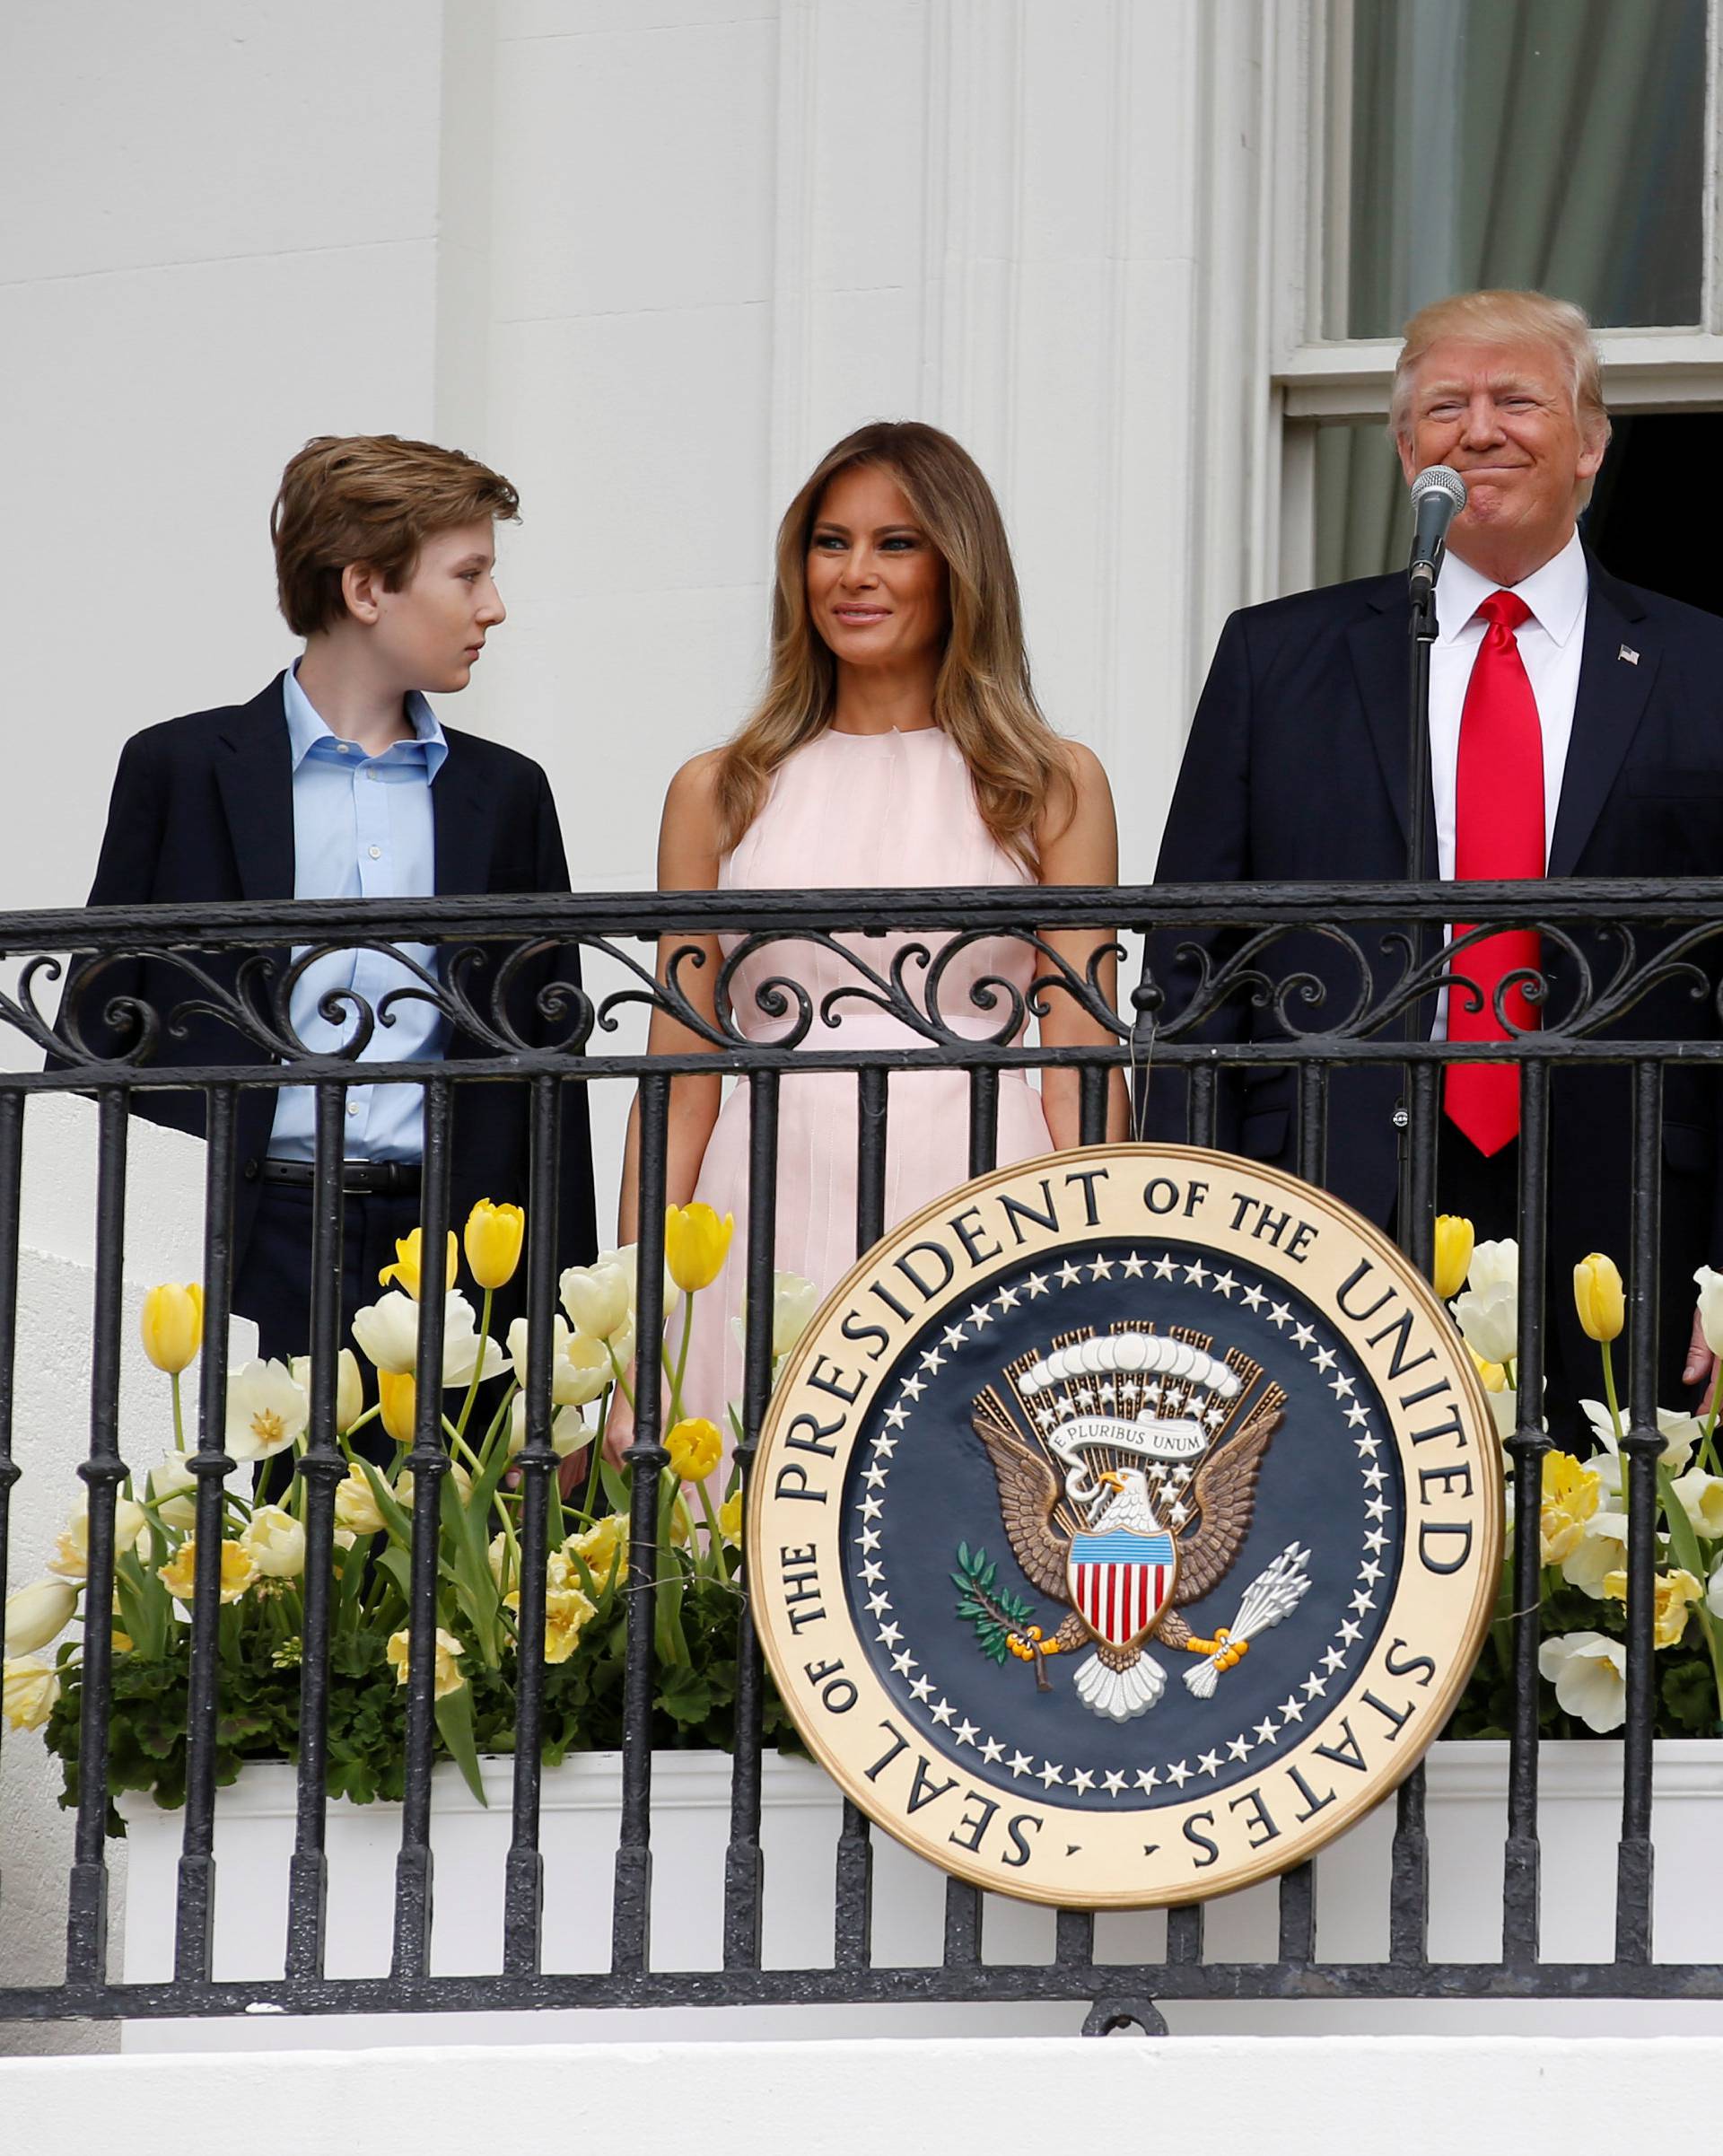 U.S. President Donald Trump, U.S. first lady Melania Trump, their son Barron and the Easter Bunny arrive for the 139th annual White House Easter Egg Roll on the South Lawn of the White House in Washington